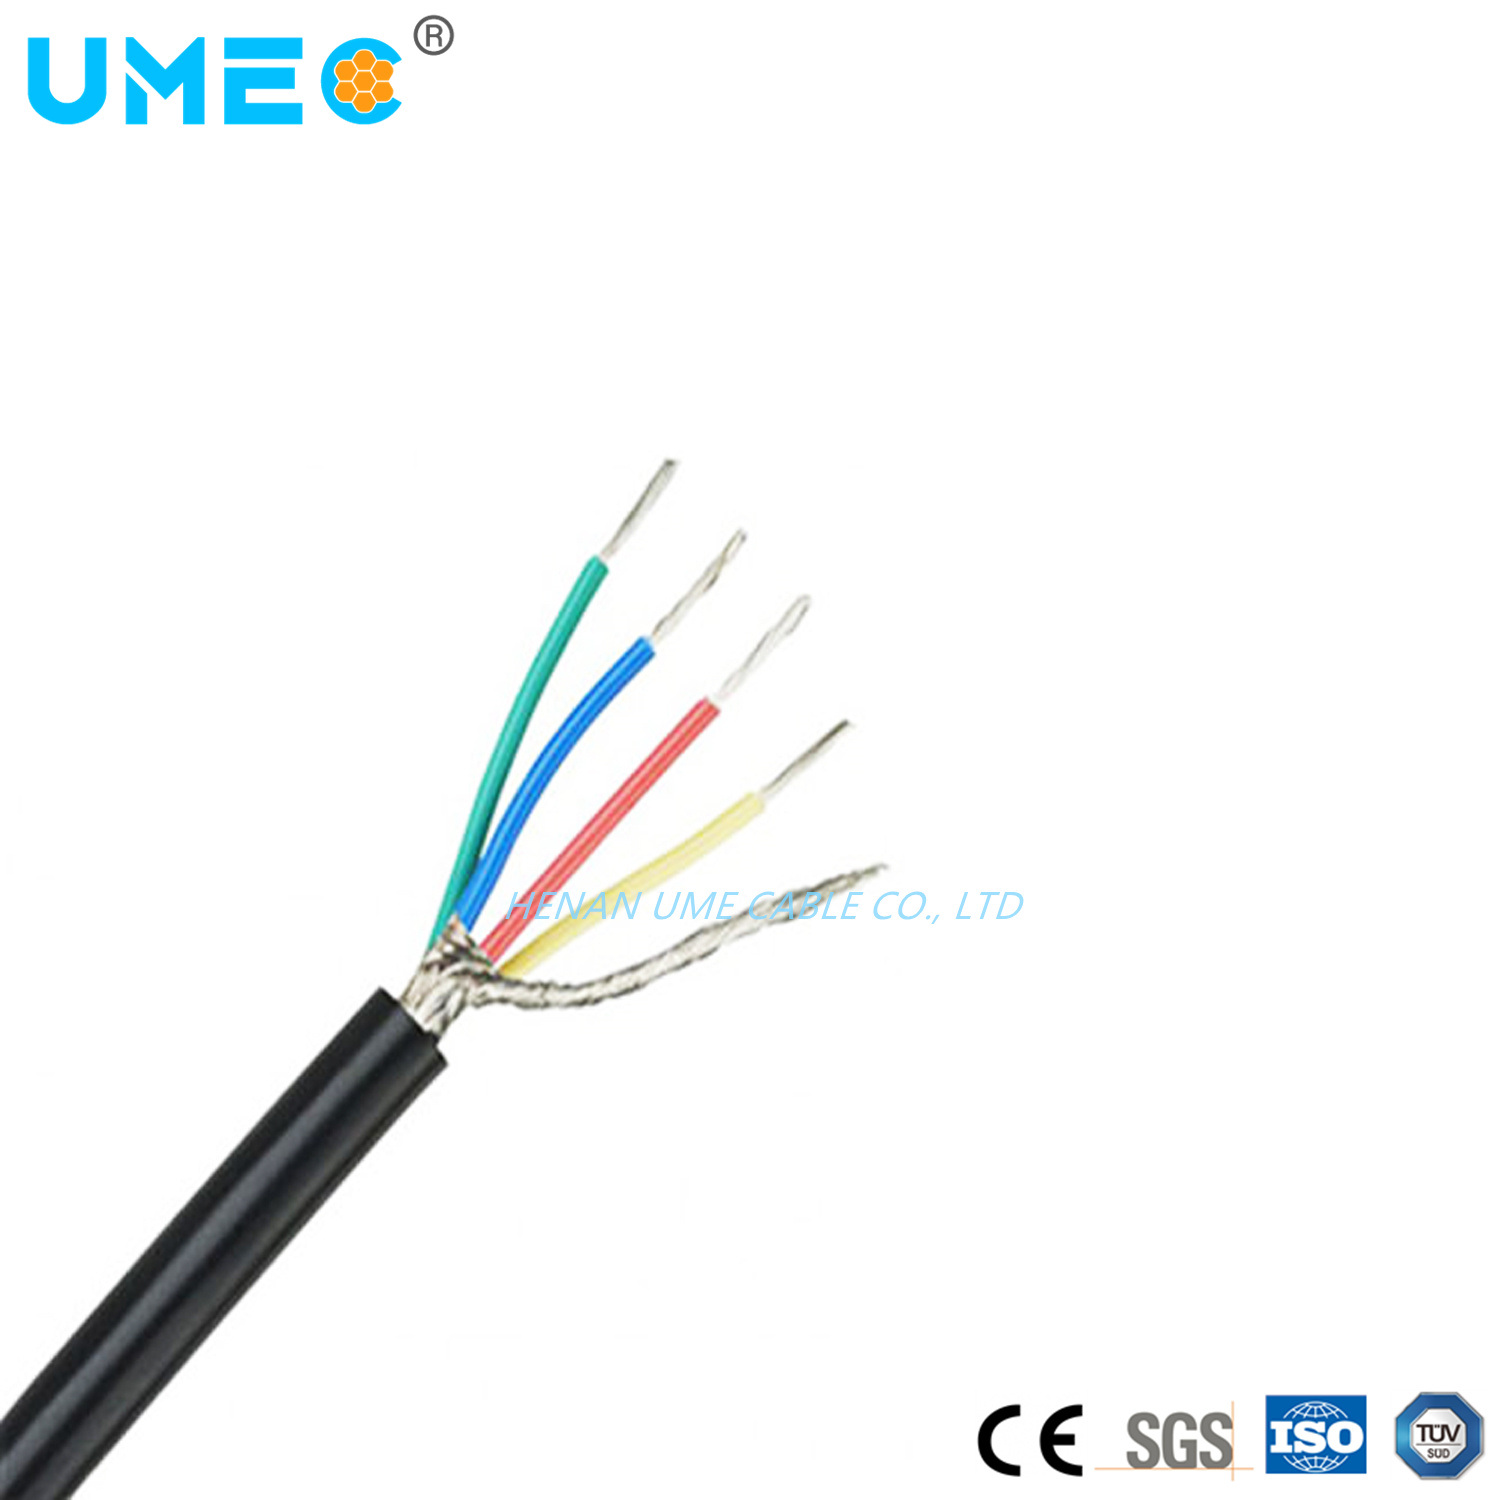 High Temperature Resistance Braiding Shielded Cable Electric Computer Instrument Cables